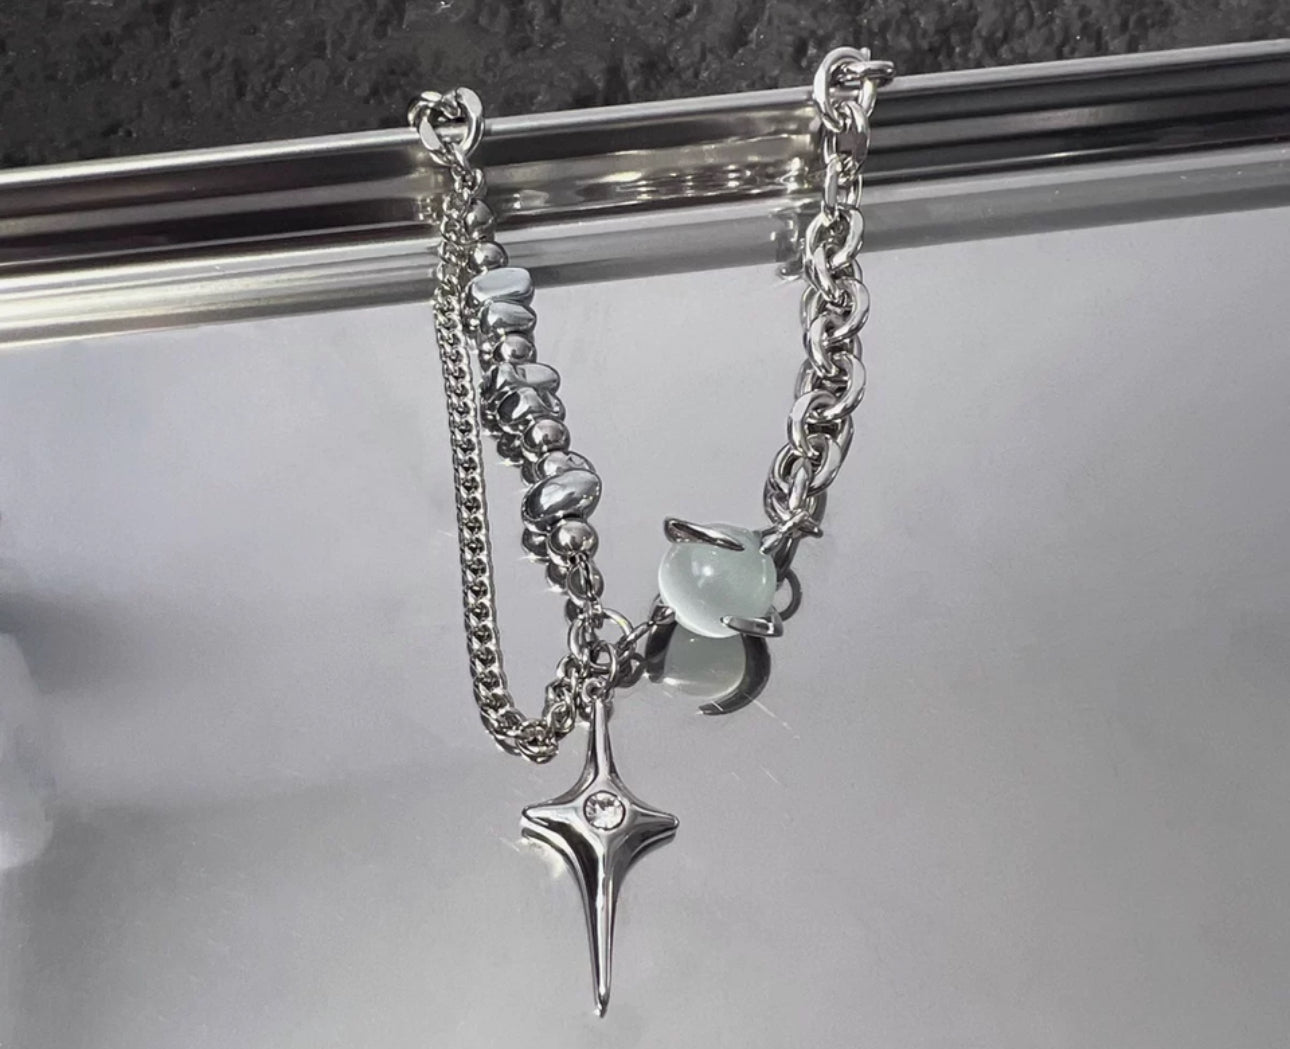 「NEW!」Cat's eye Crossover necklace